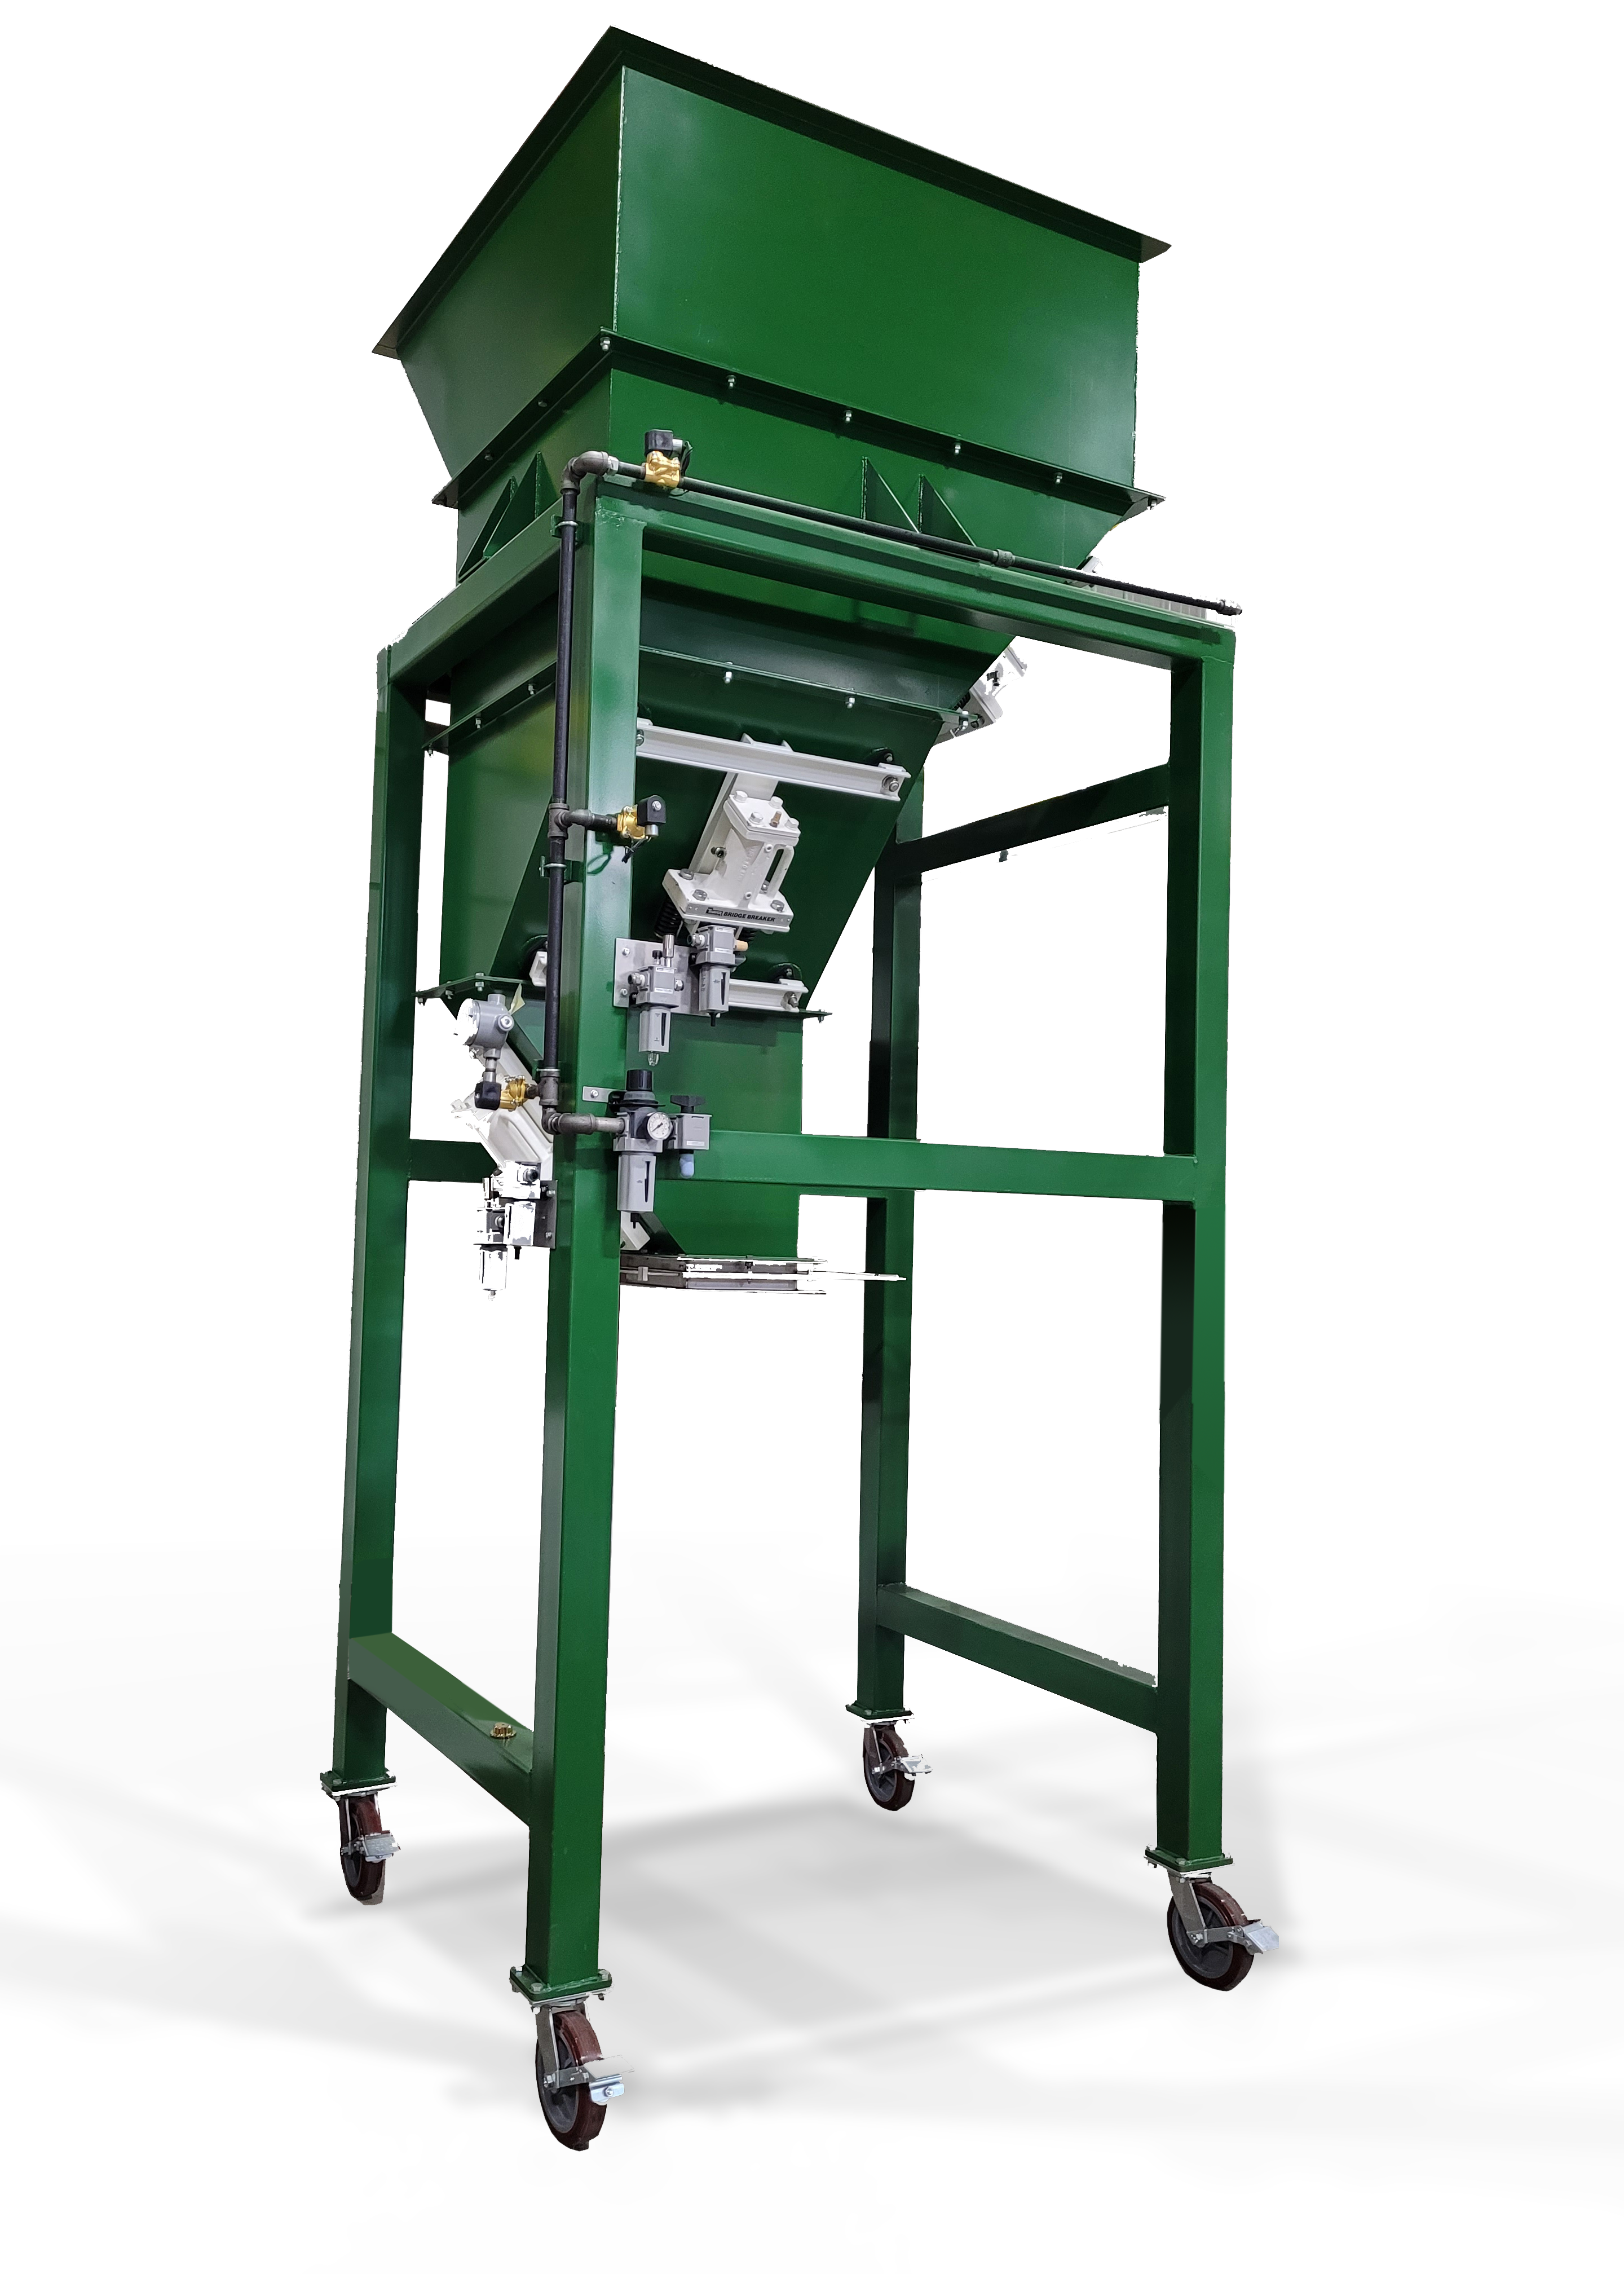 Thayer Scale Introduces the Bridgebreaker™ Hopper for the Bioenergy Industry